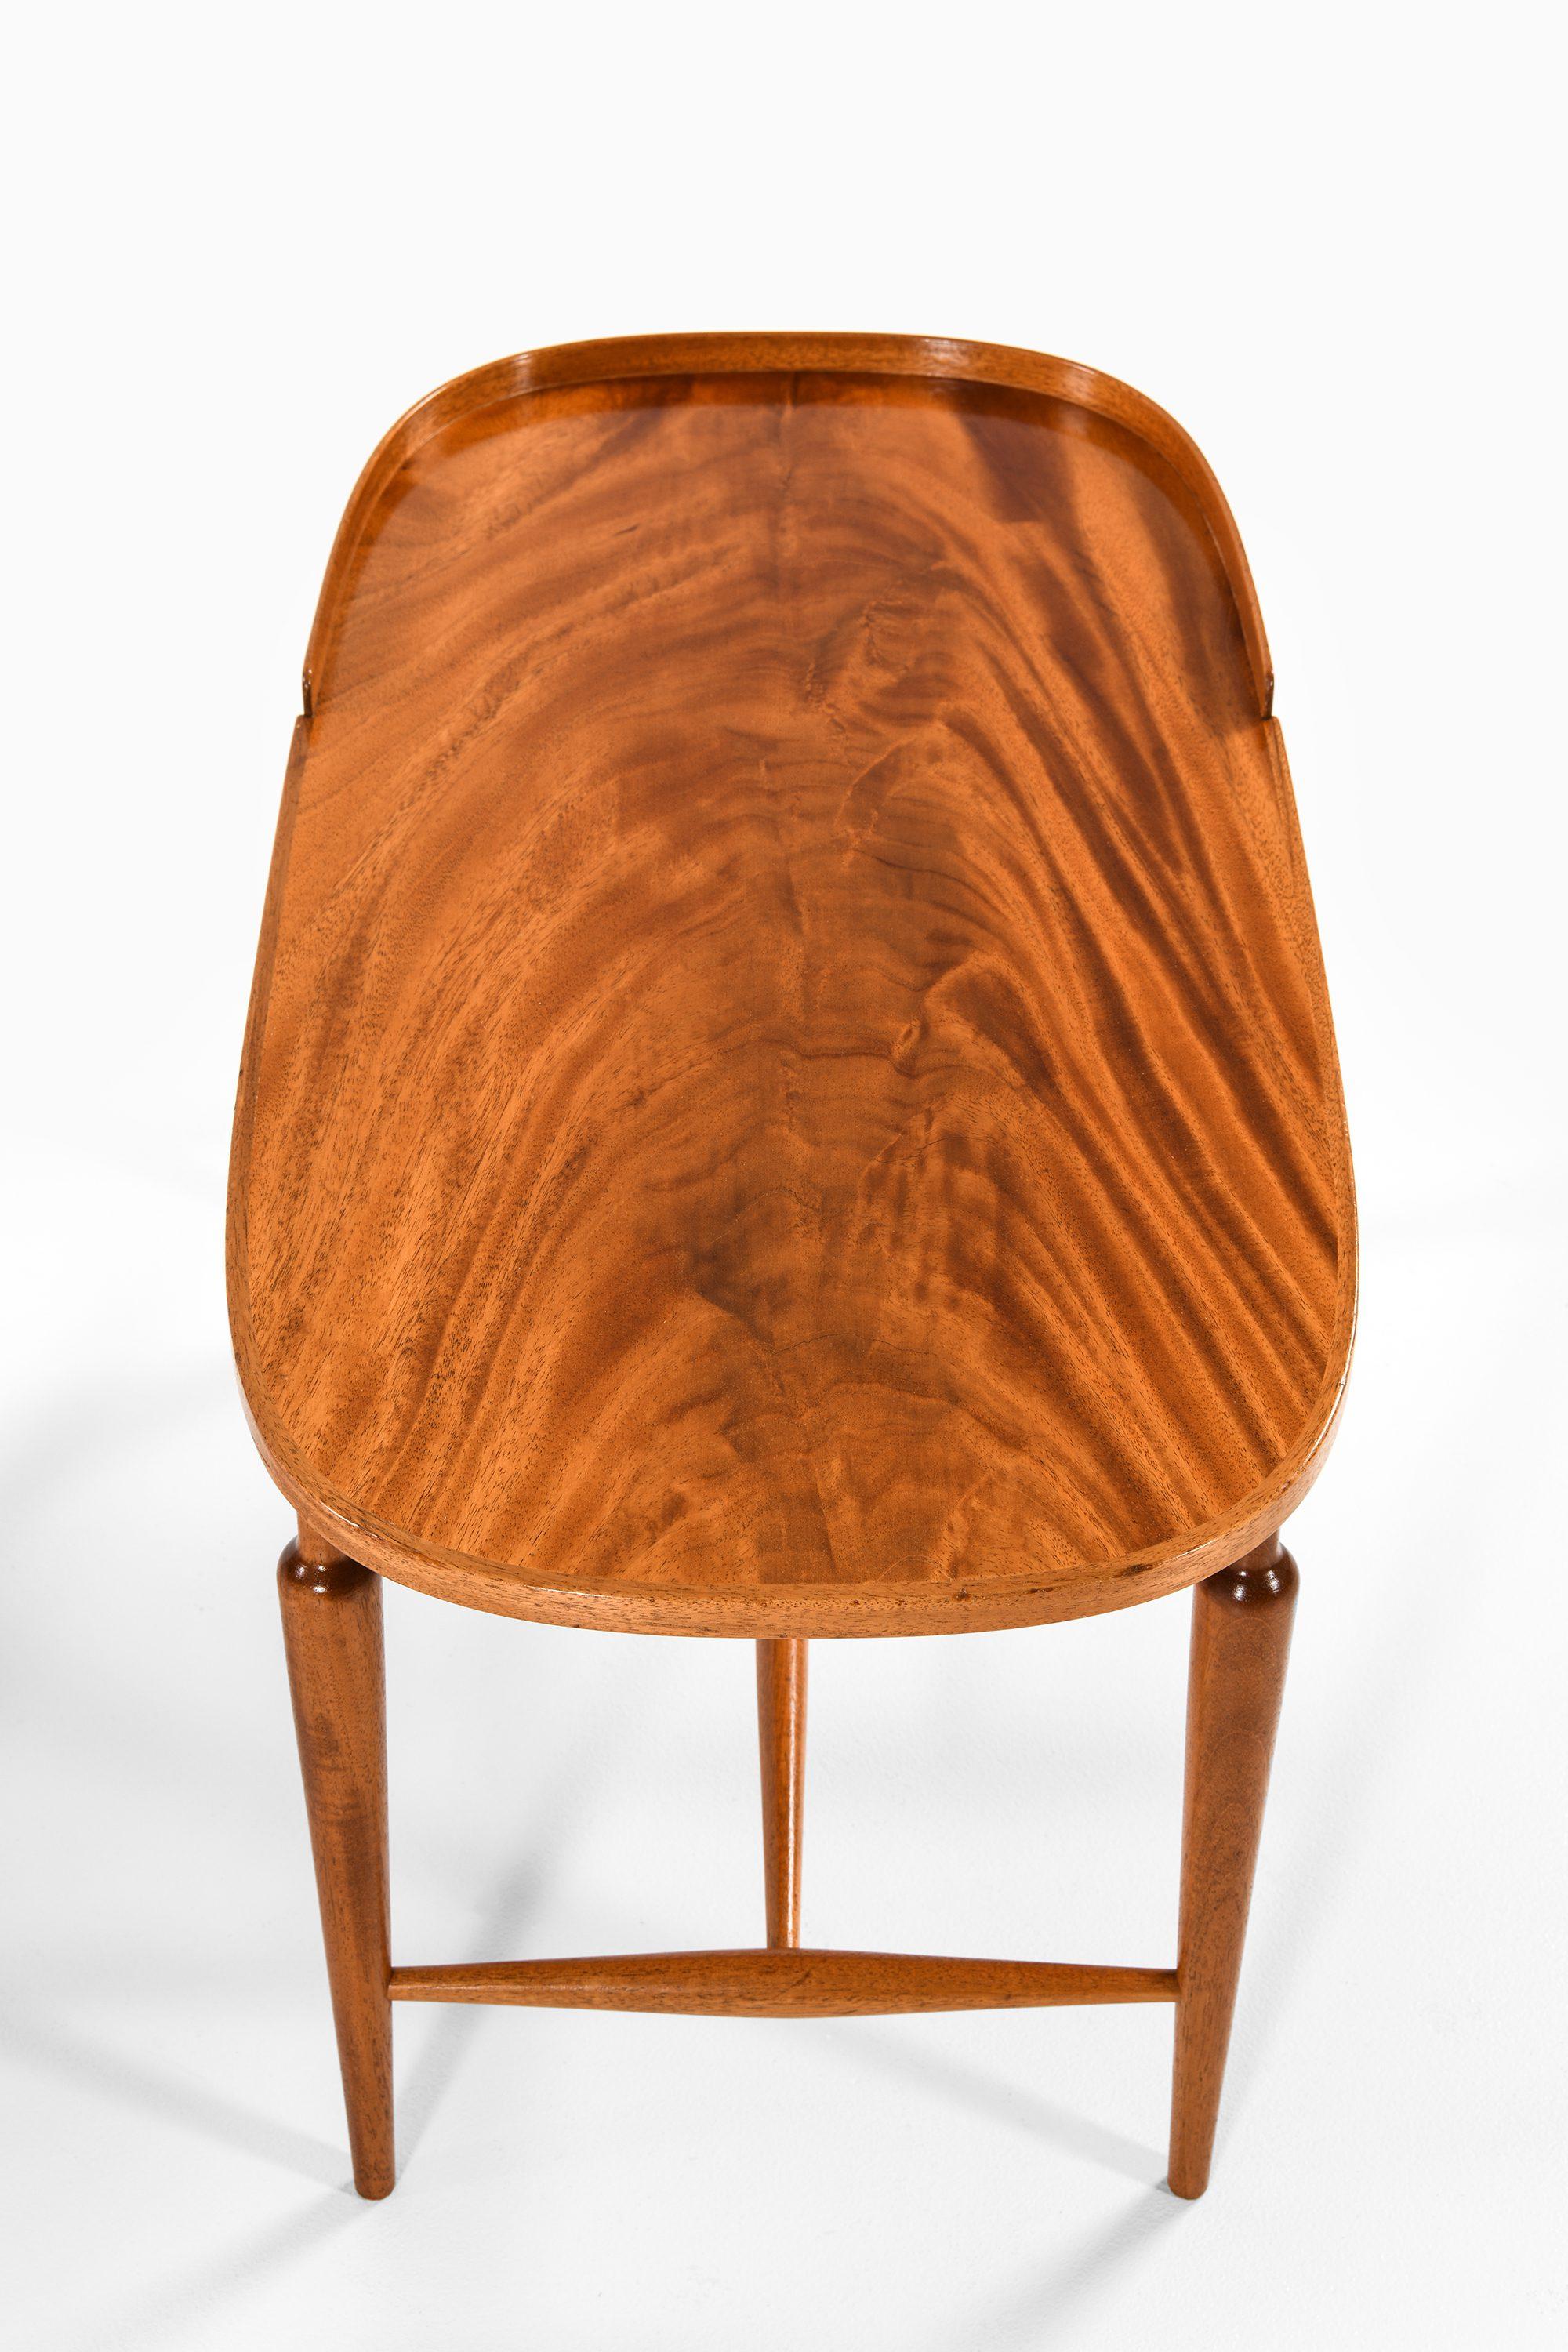 Scandinavian Modern Pair of Side Table in Mahogany by Josef Frank, 1939 For Sale